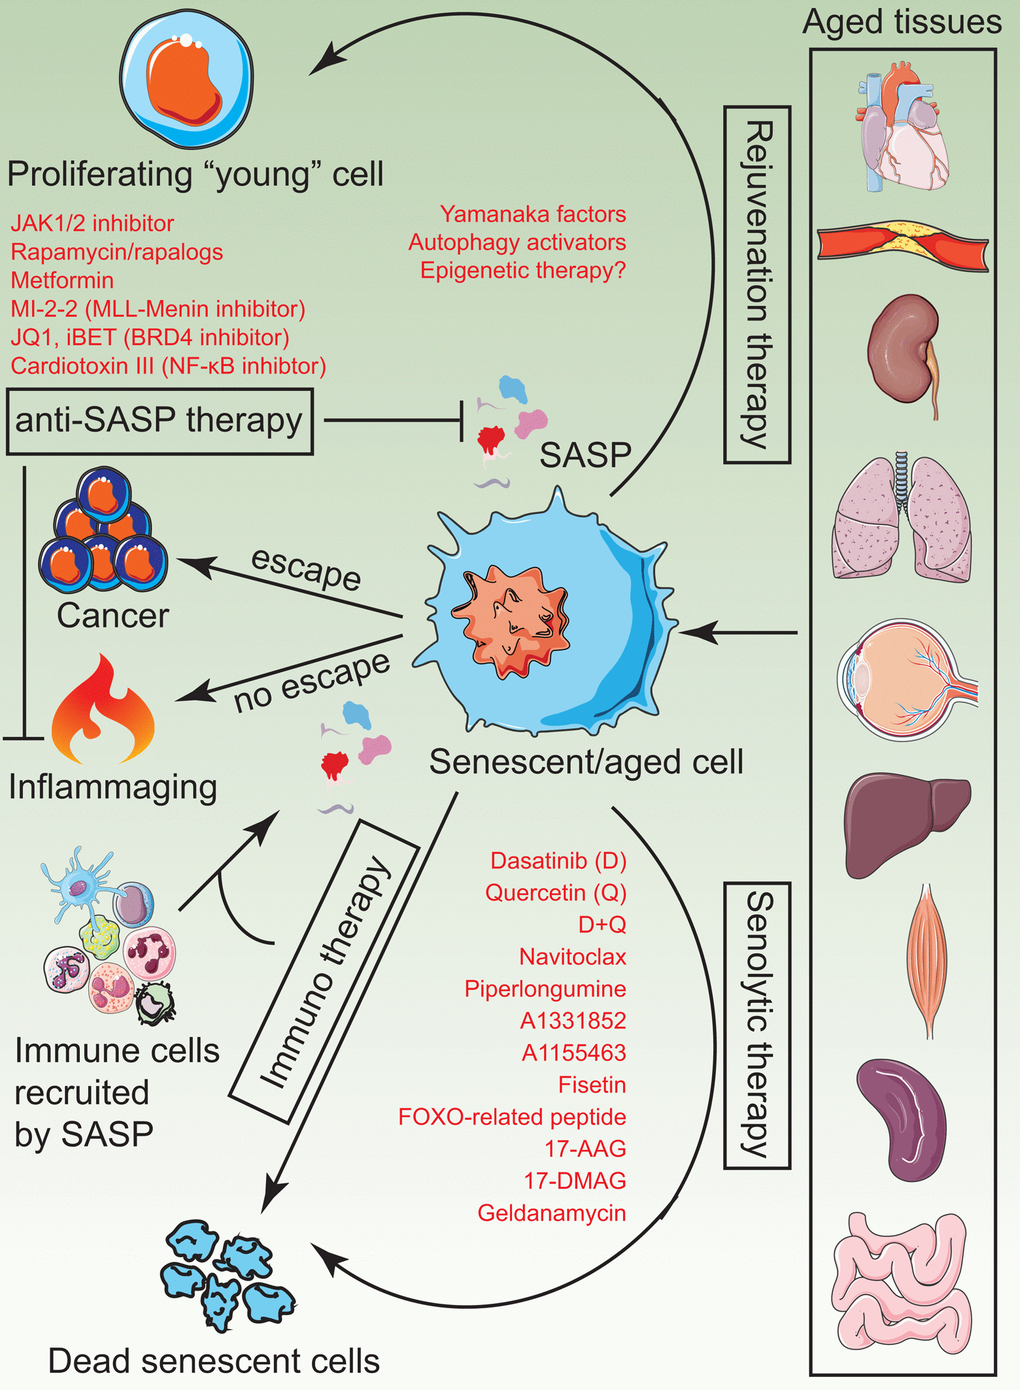 A visual summary of current senotherapies. Aged tissues tend to accumulate senescent cells which impose detrimental changes to tissue structure, regenerative ability and physiological function due to chronic inflammation. Current and plausible strategies to treat these adverse effects include administration of senolytics, rejuvenation therapy by induce partial reprogramming to a “youthful” state, anti-SASP therapy to prevent the generation and release of inflammatory cytokines and immunotherapy to activate innate immune mechanisms of the body, which in turn, clear senescent cells naturally.